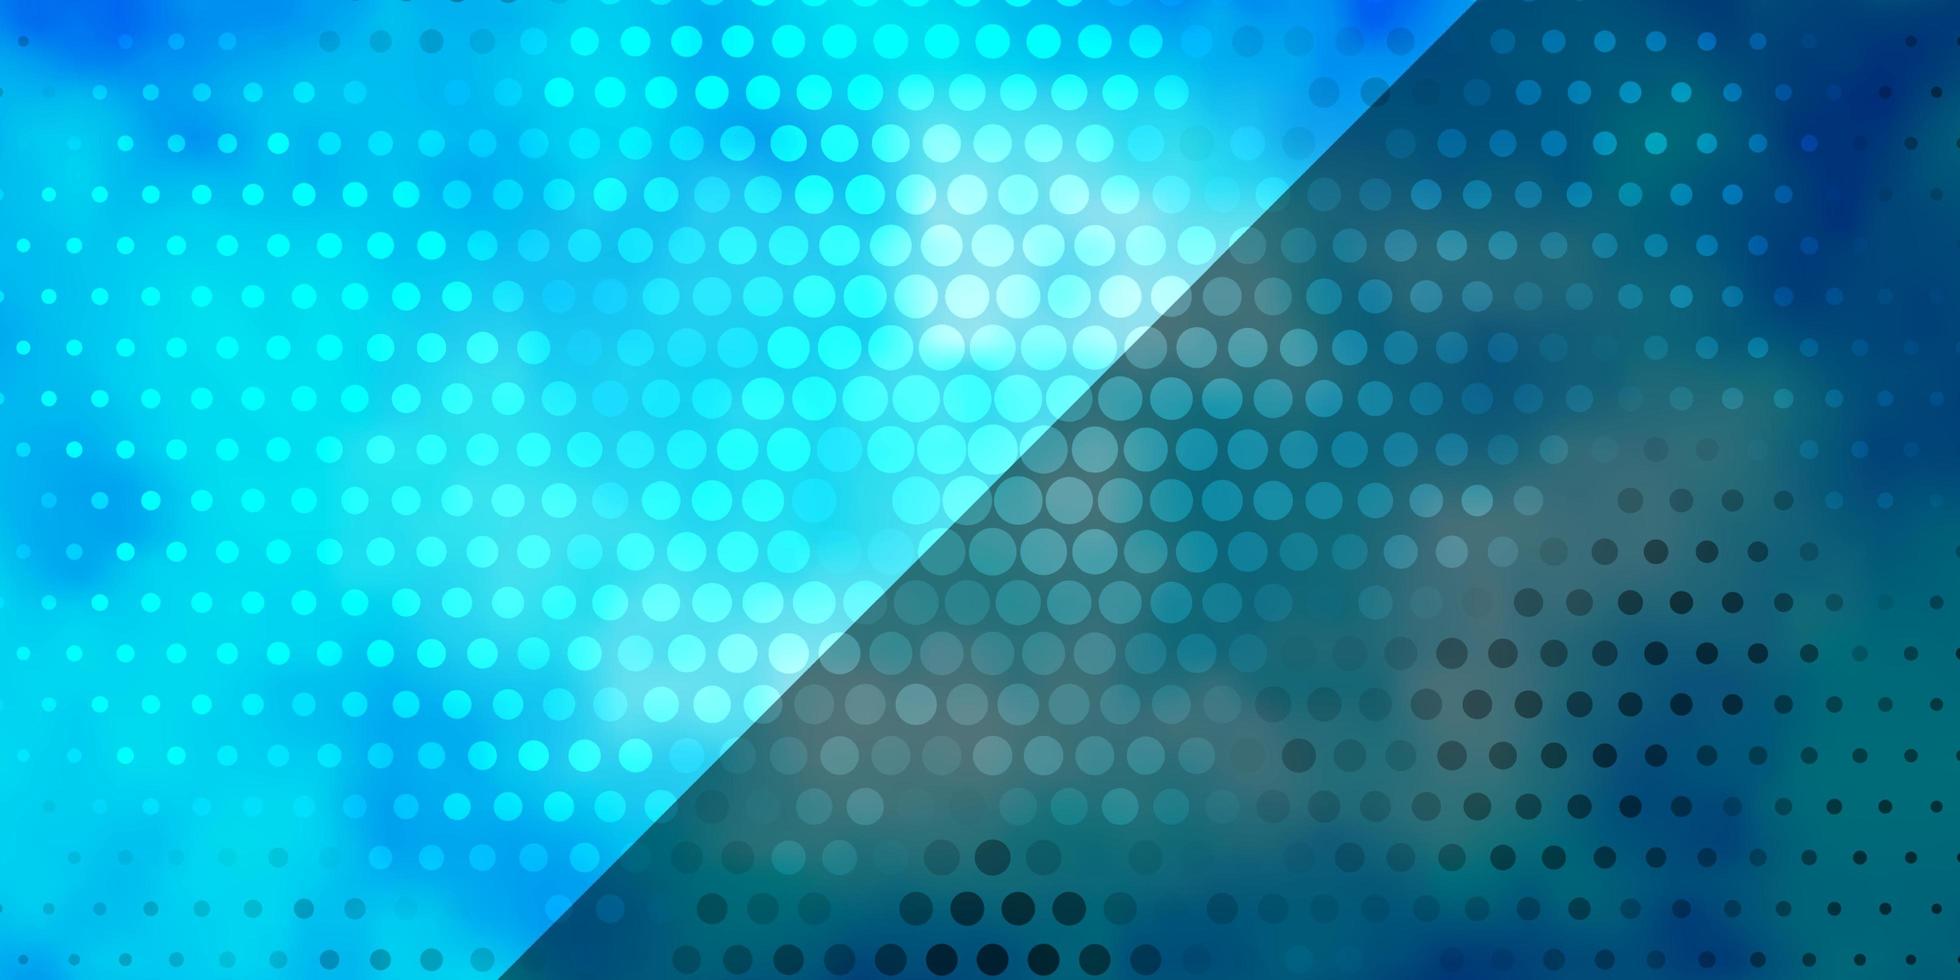 Light BLUE vector layout with circles